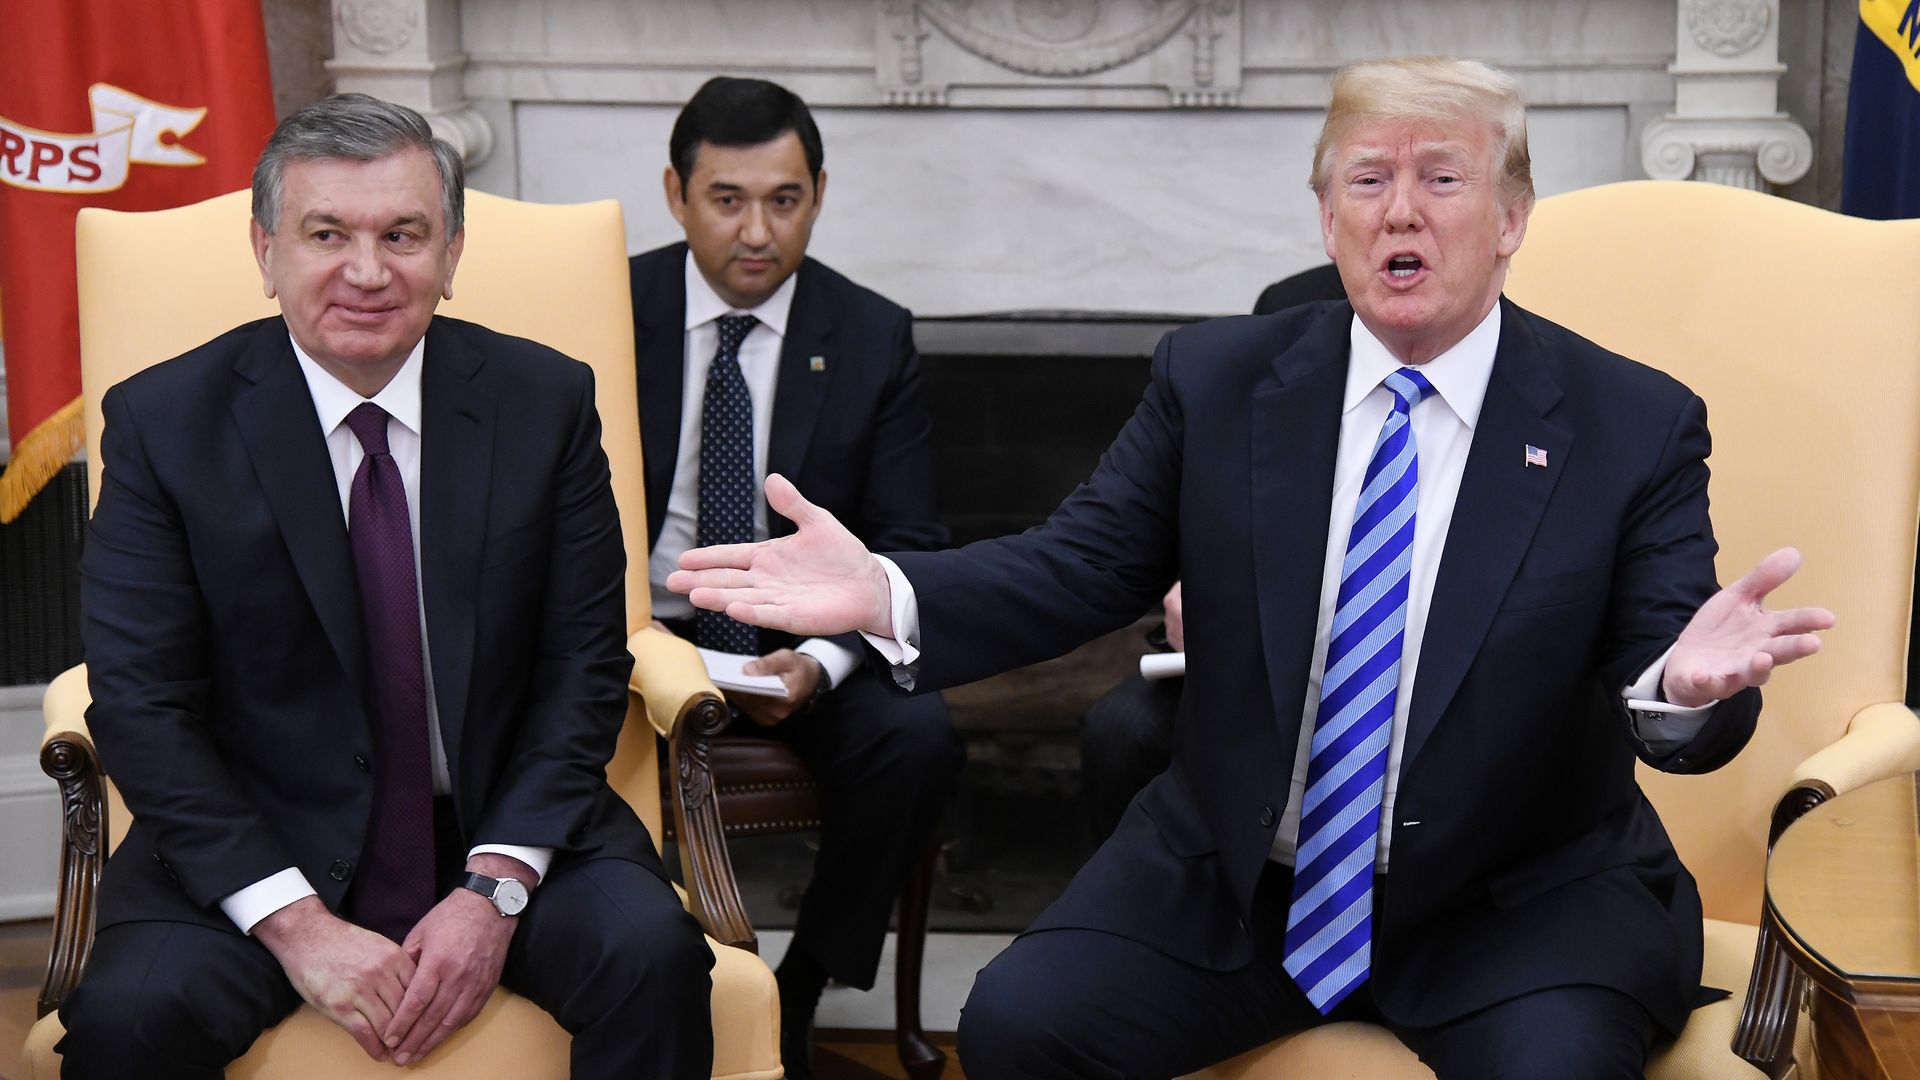 President Donald Trump speaks as the President of the Republic of Uzbekistan Shavkat Mirziyoyev listens during a meeting in the Oval Office 